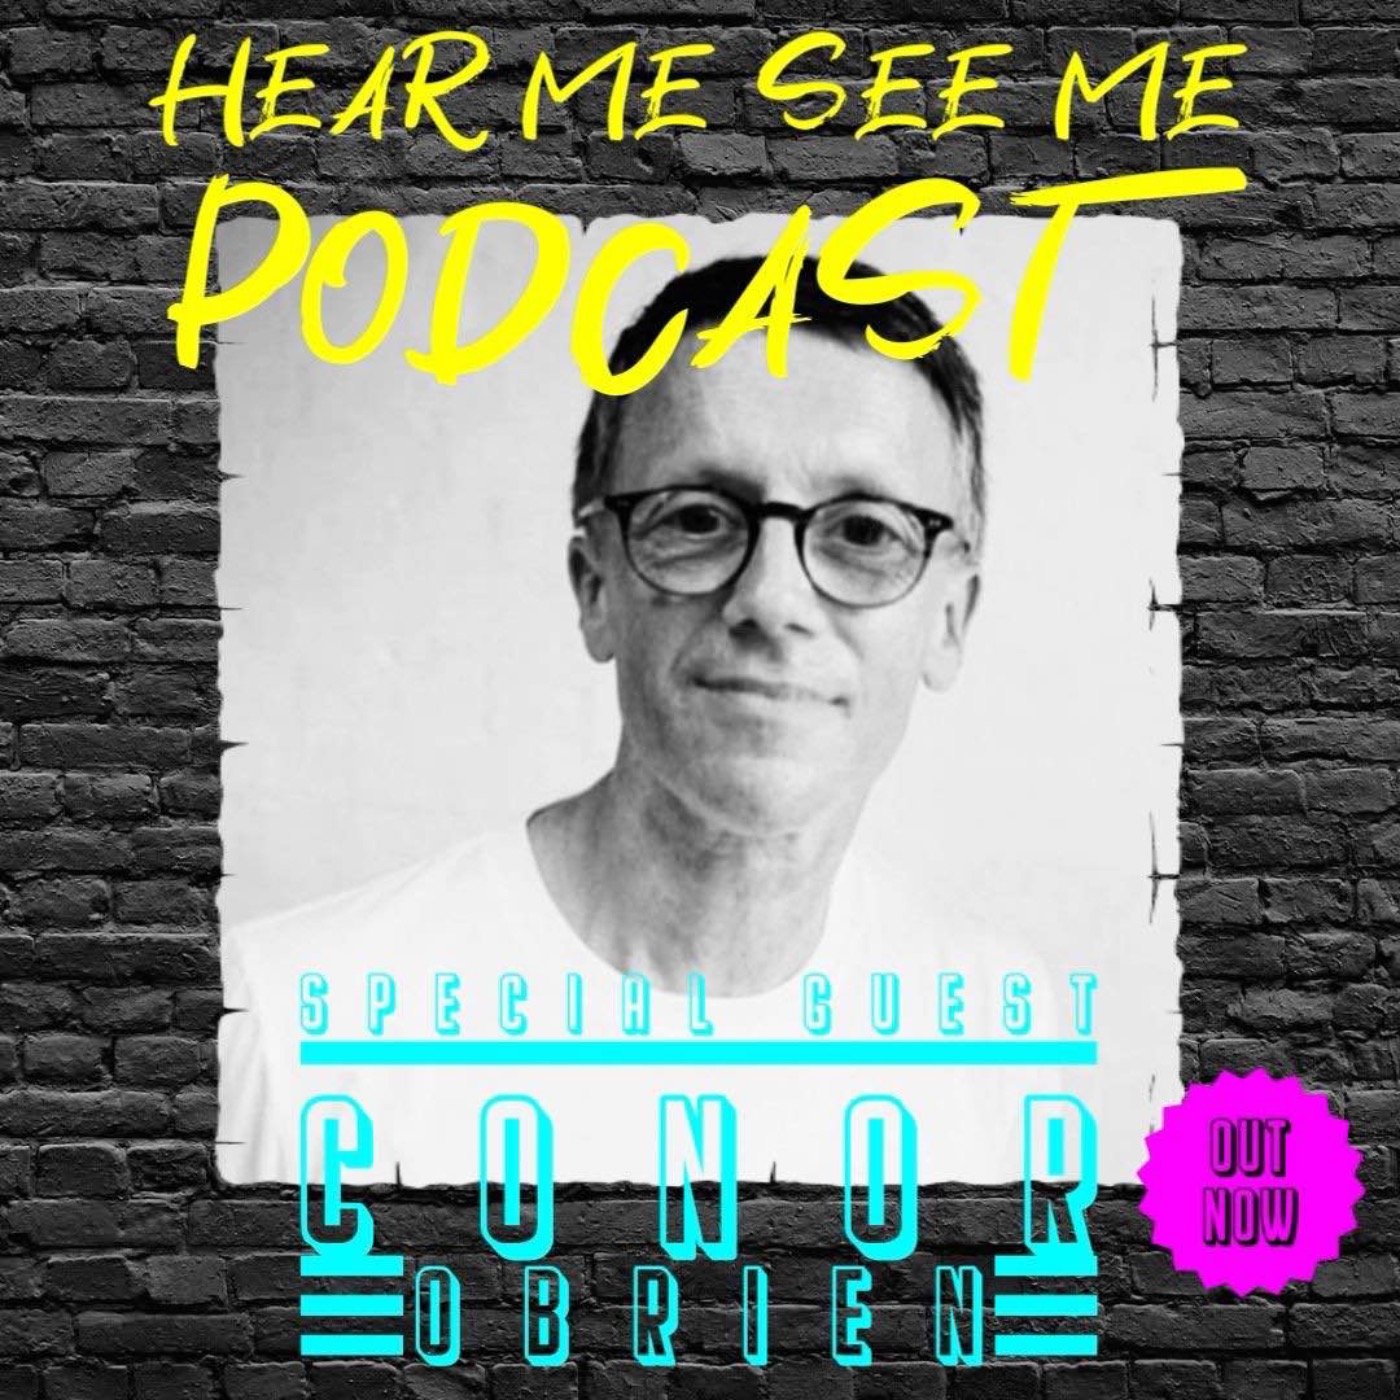 cover art for Hear Me, See Me Podcast with Conor O'Brien, Haircuts4Homeless Norwich Team Leader.